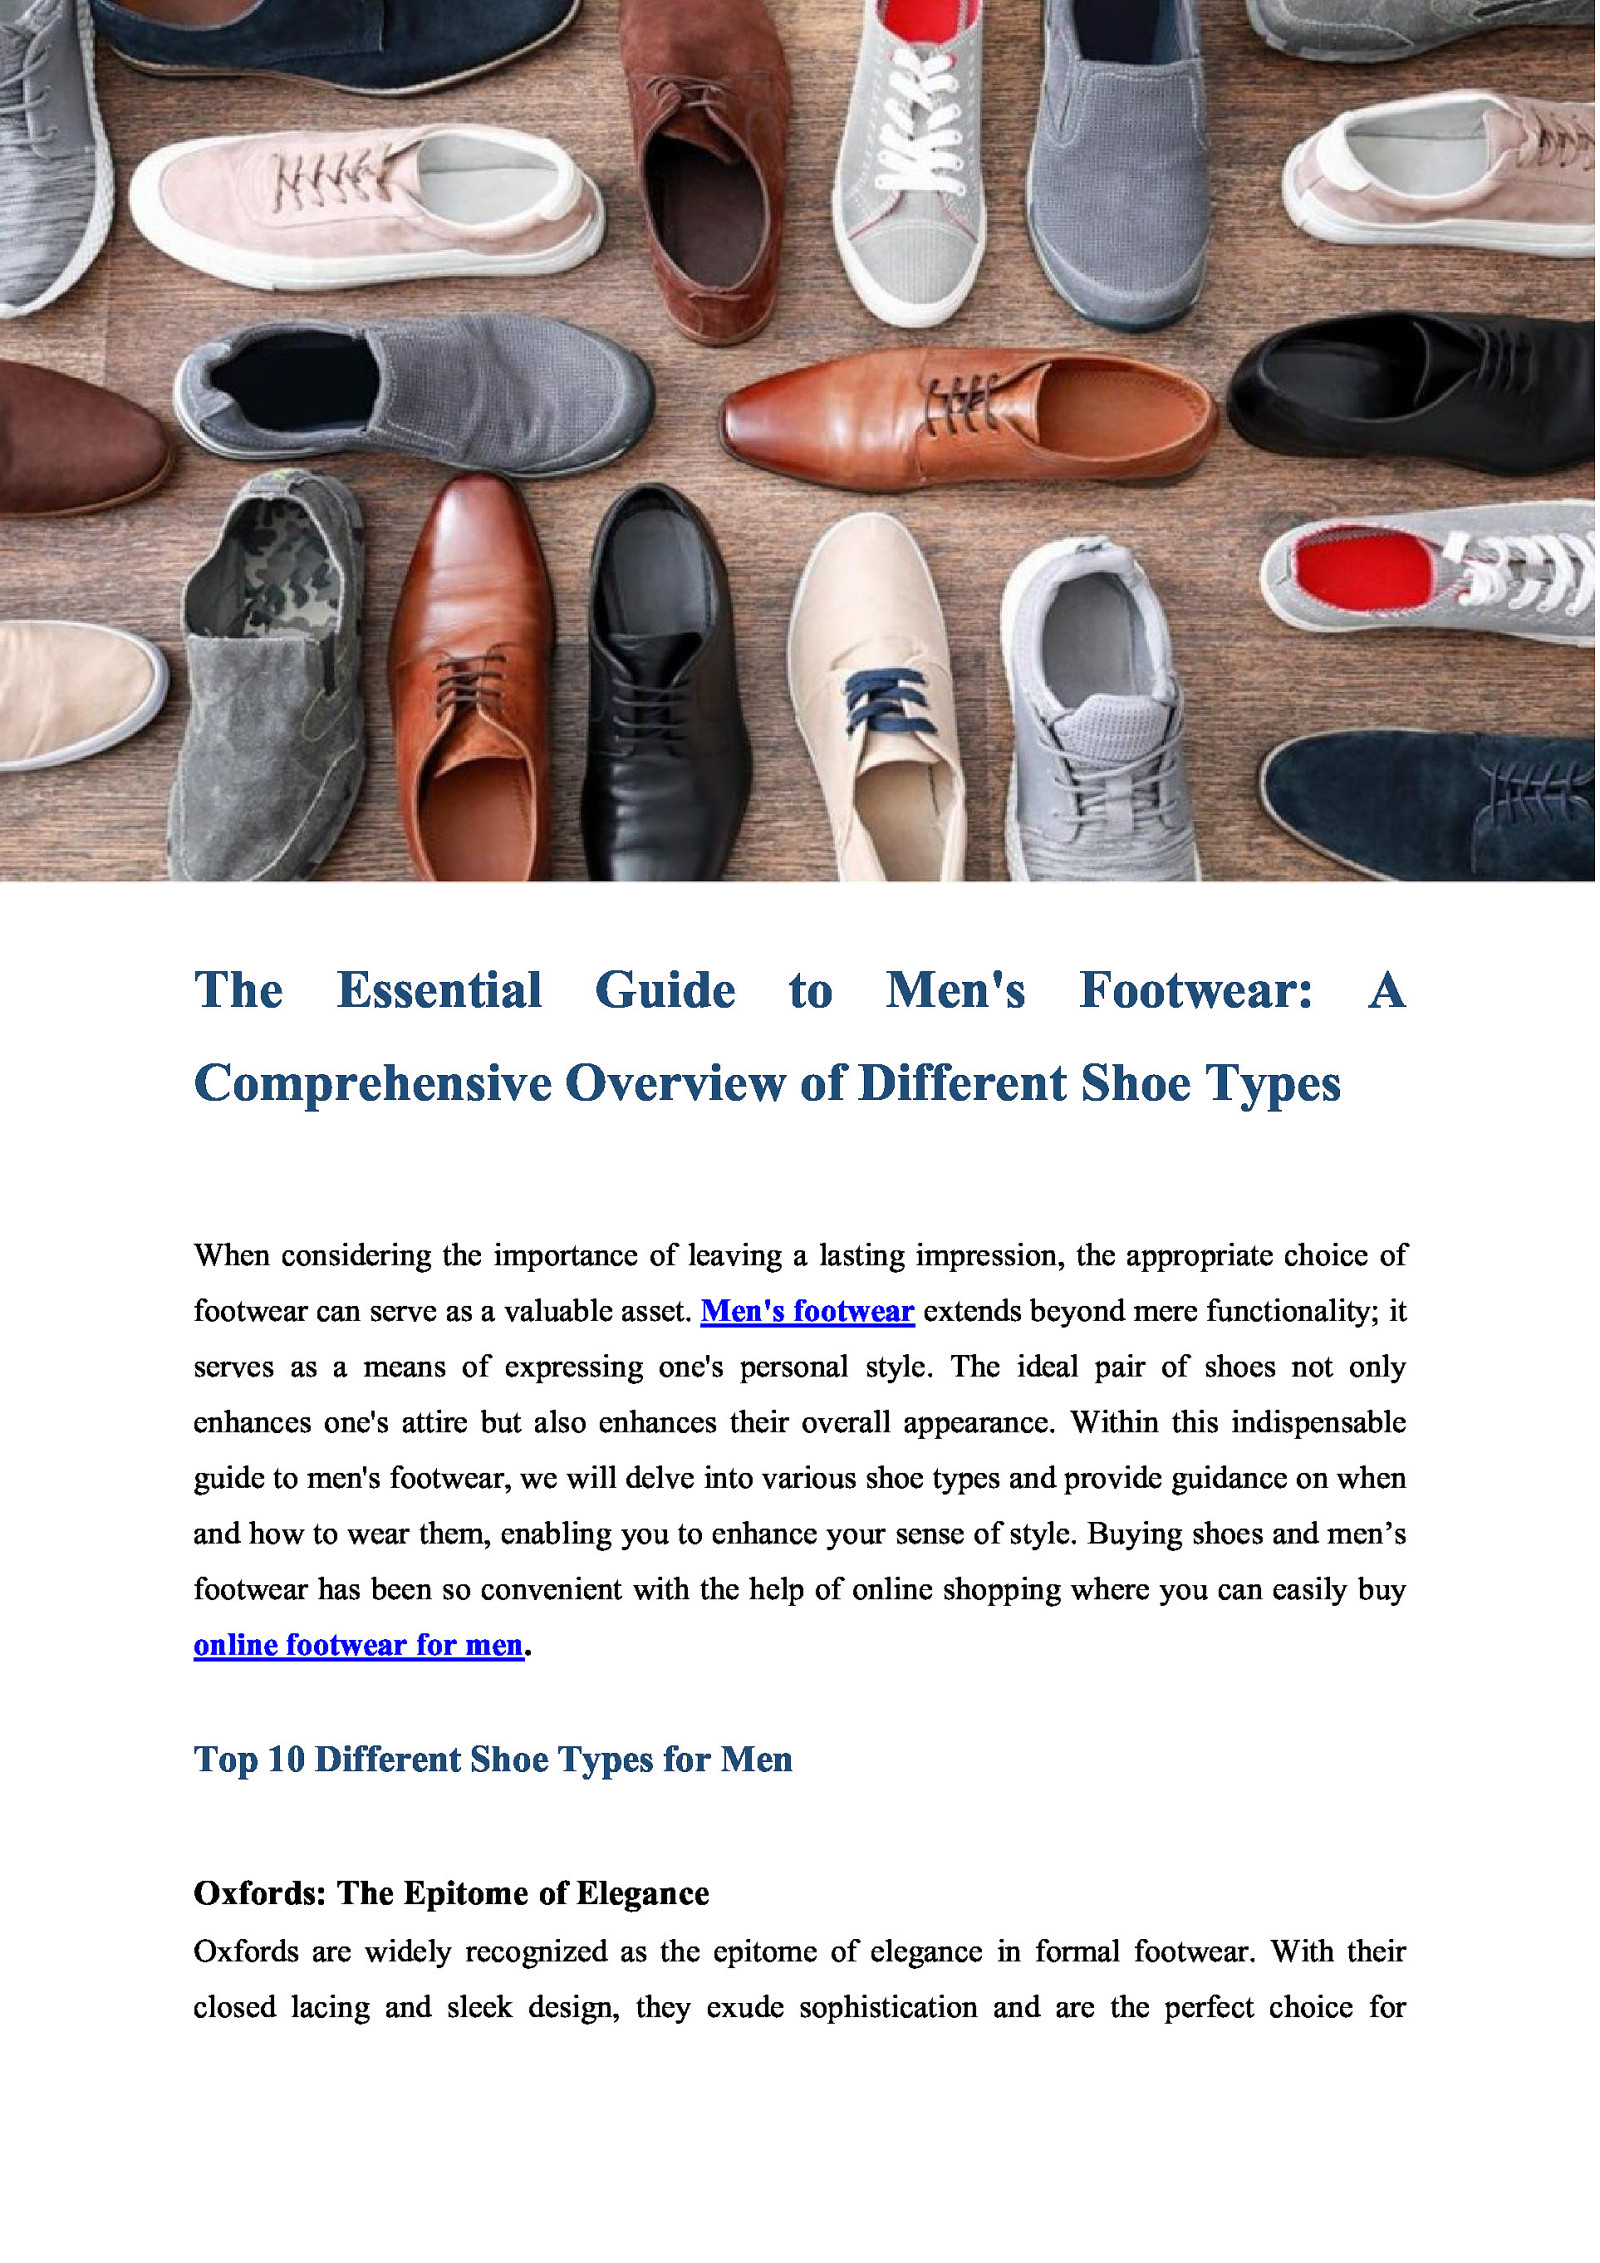 The Essential Guide to Men’s Footwear: A Comprehensive Overview of Different Shoe Types